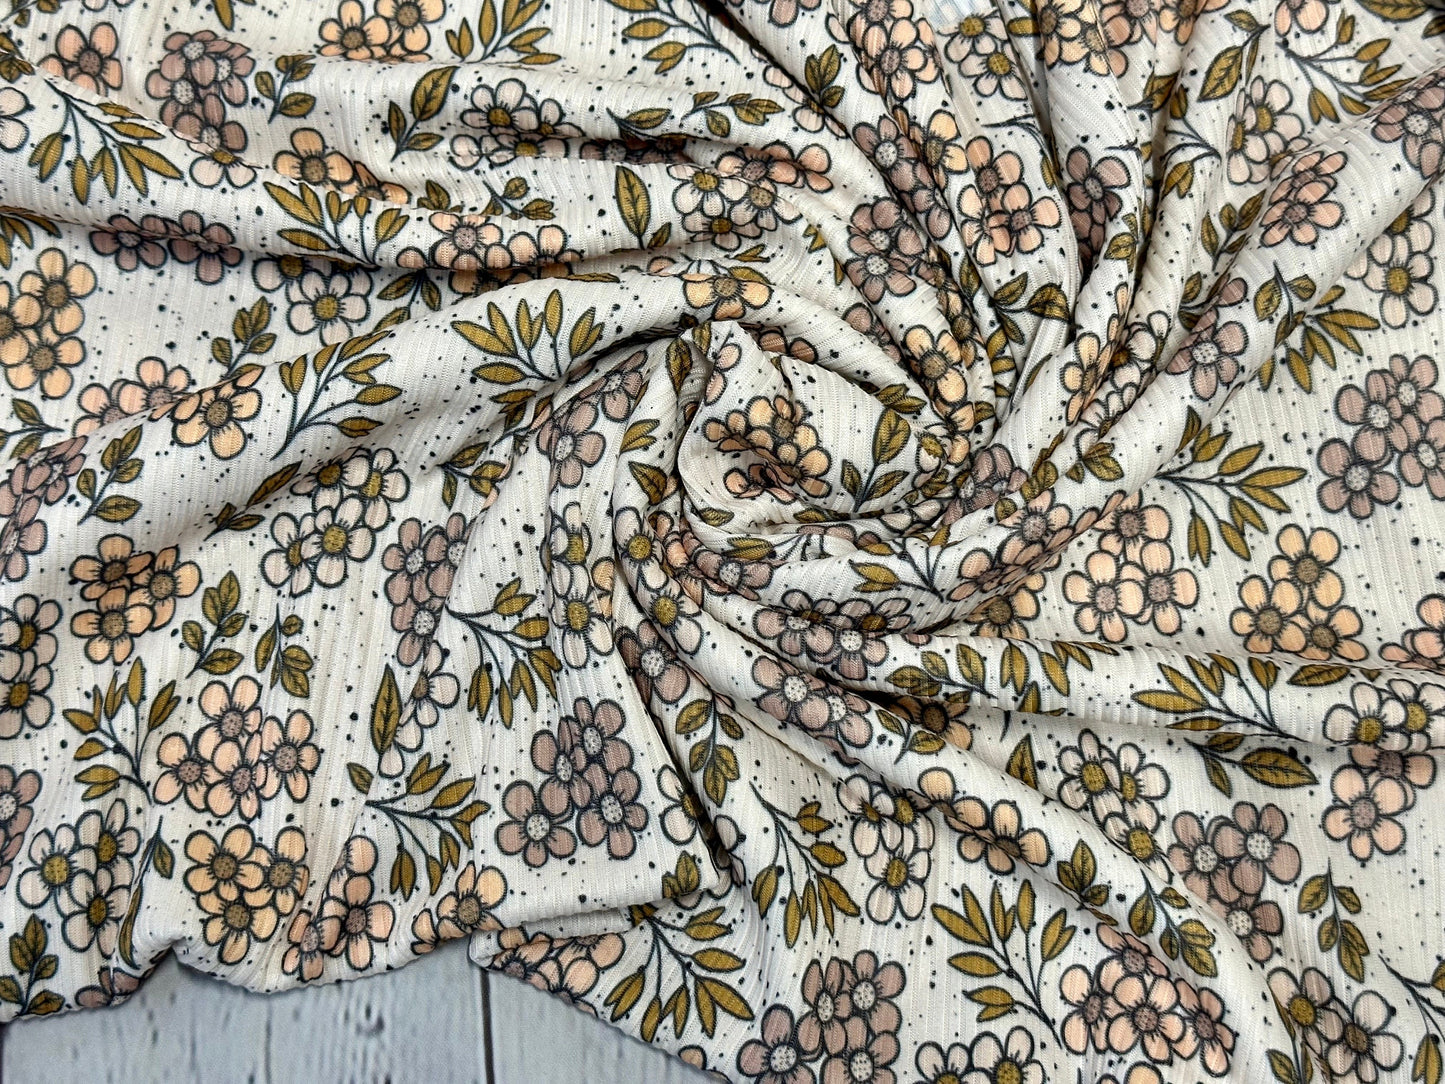 DBP 4x2 Rib Boho Fall Floral Brushed Polyester Spandex Floral Fabric By The Yard